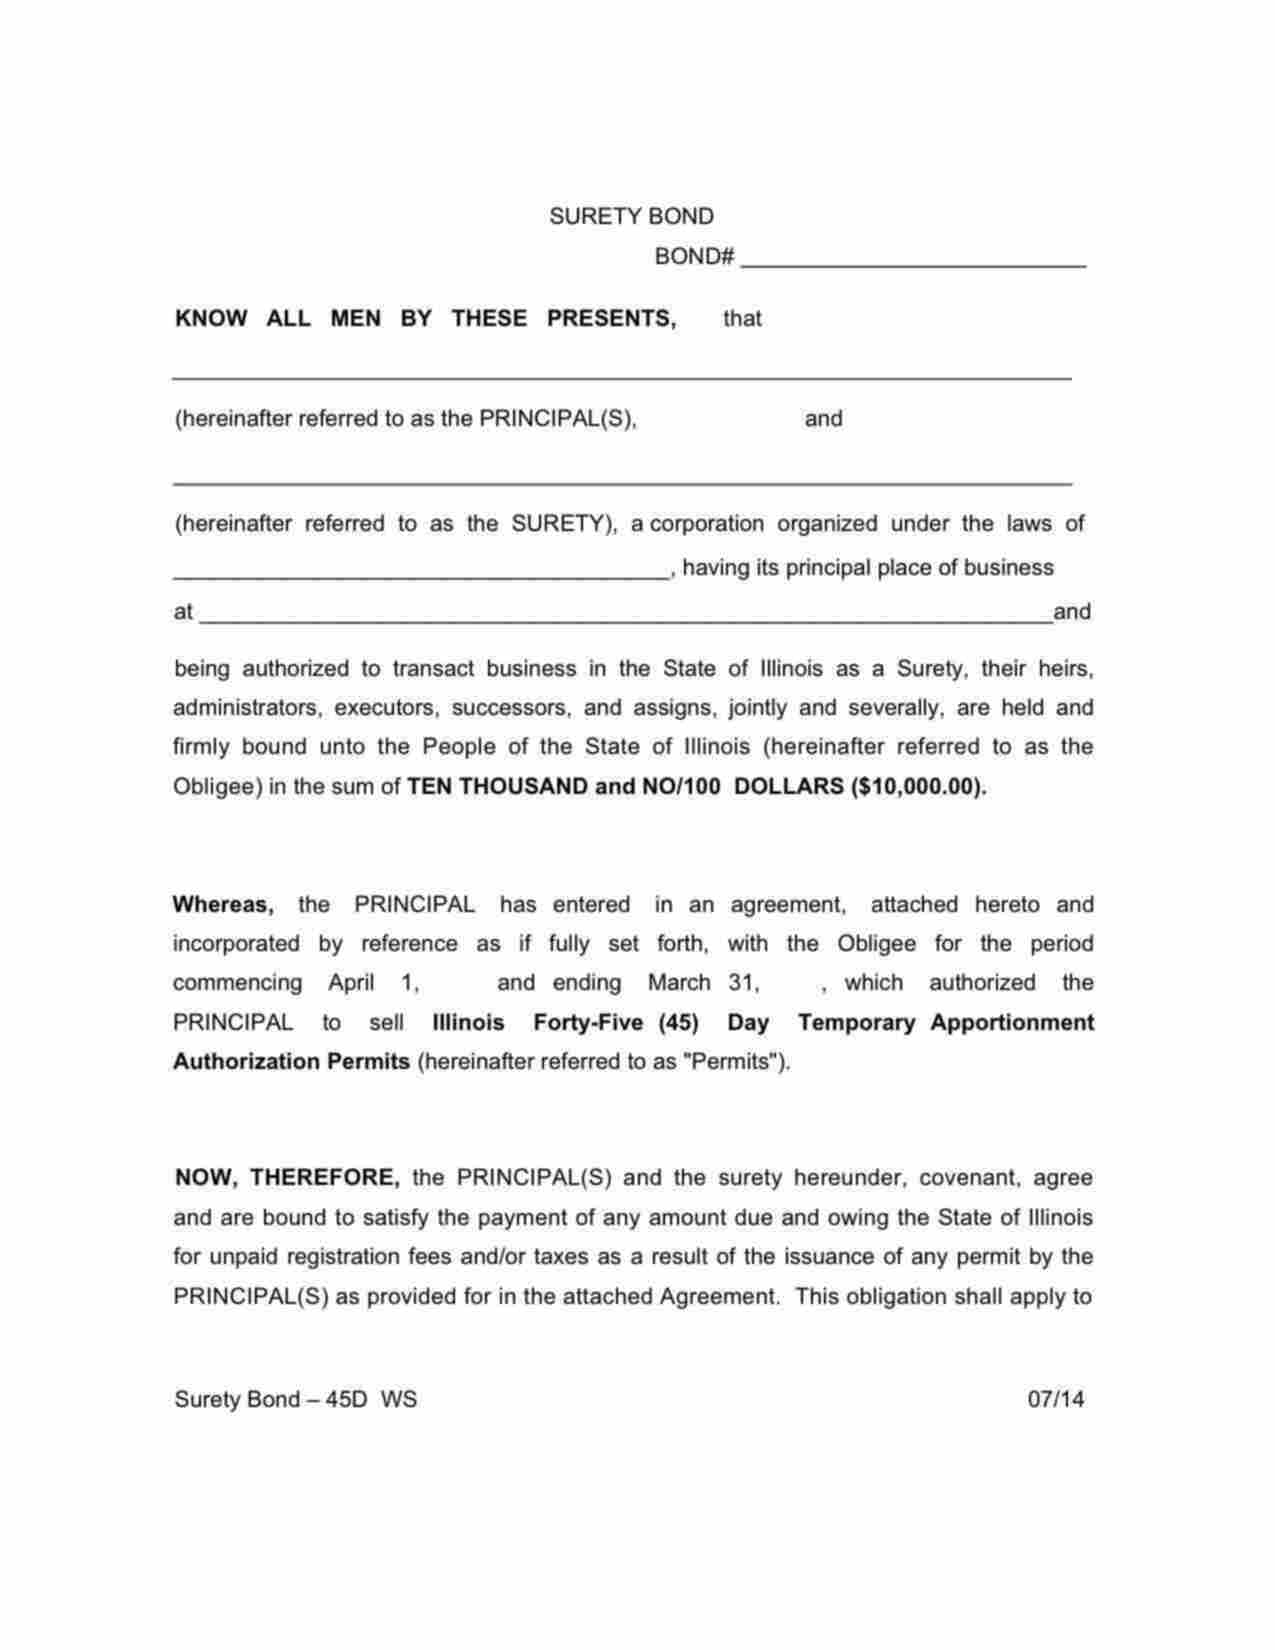 Illinois 45 Day Temporary Apportionment Authorization Permit Bond Form